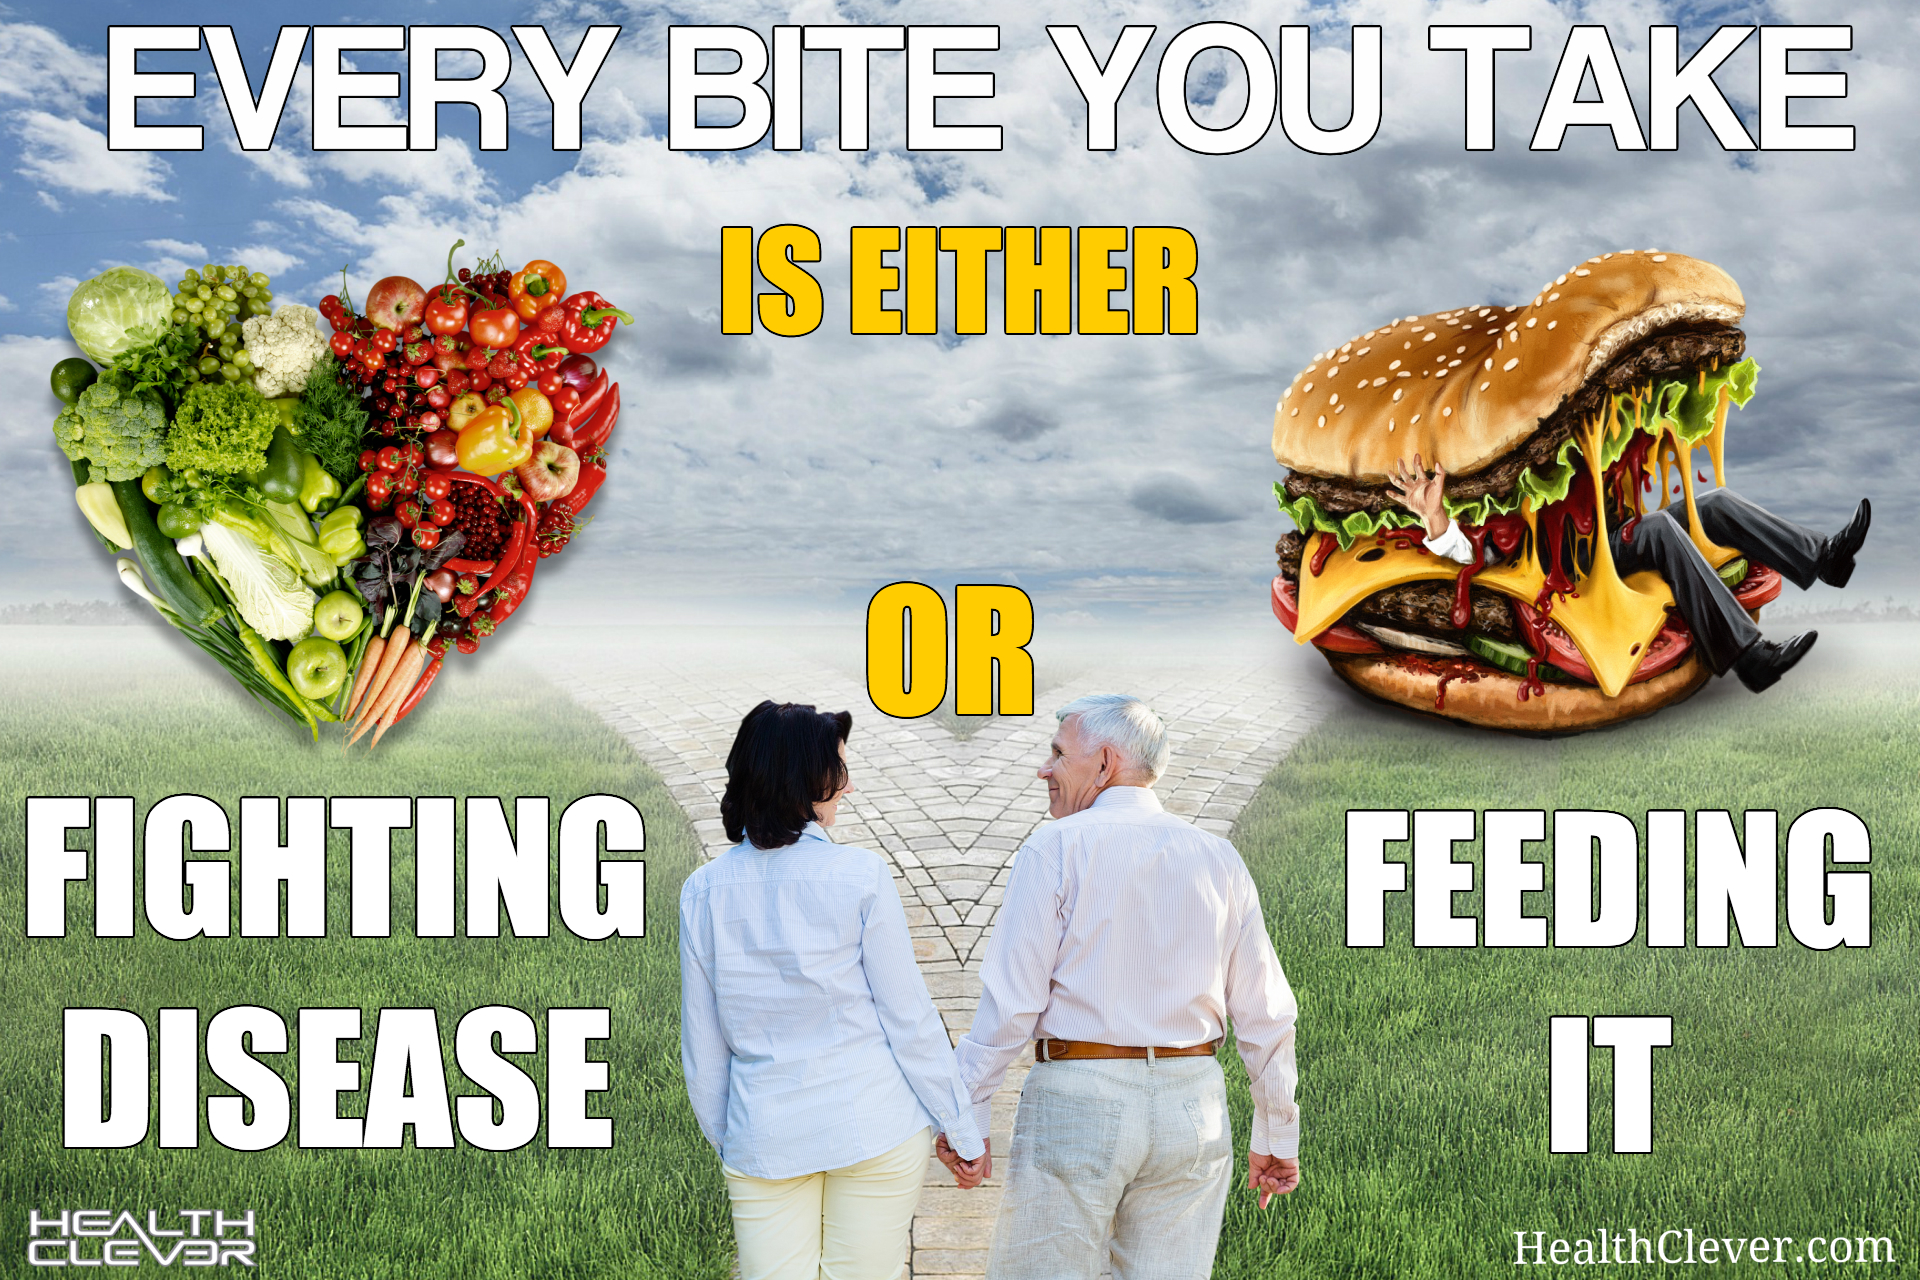 What you eat matters. You are what you eat.